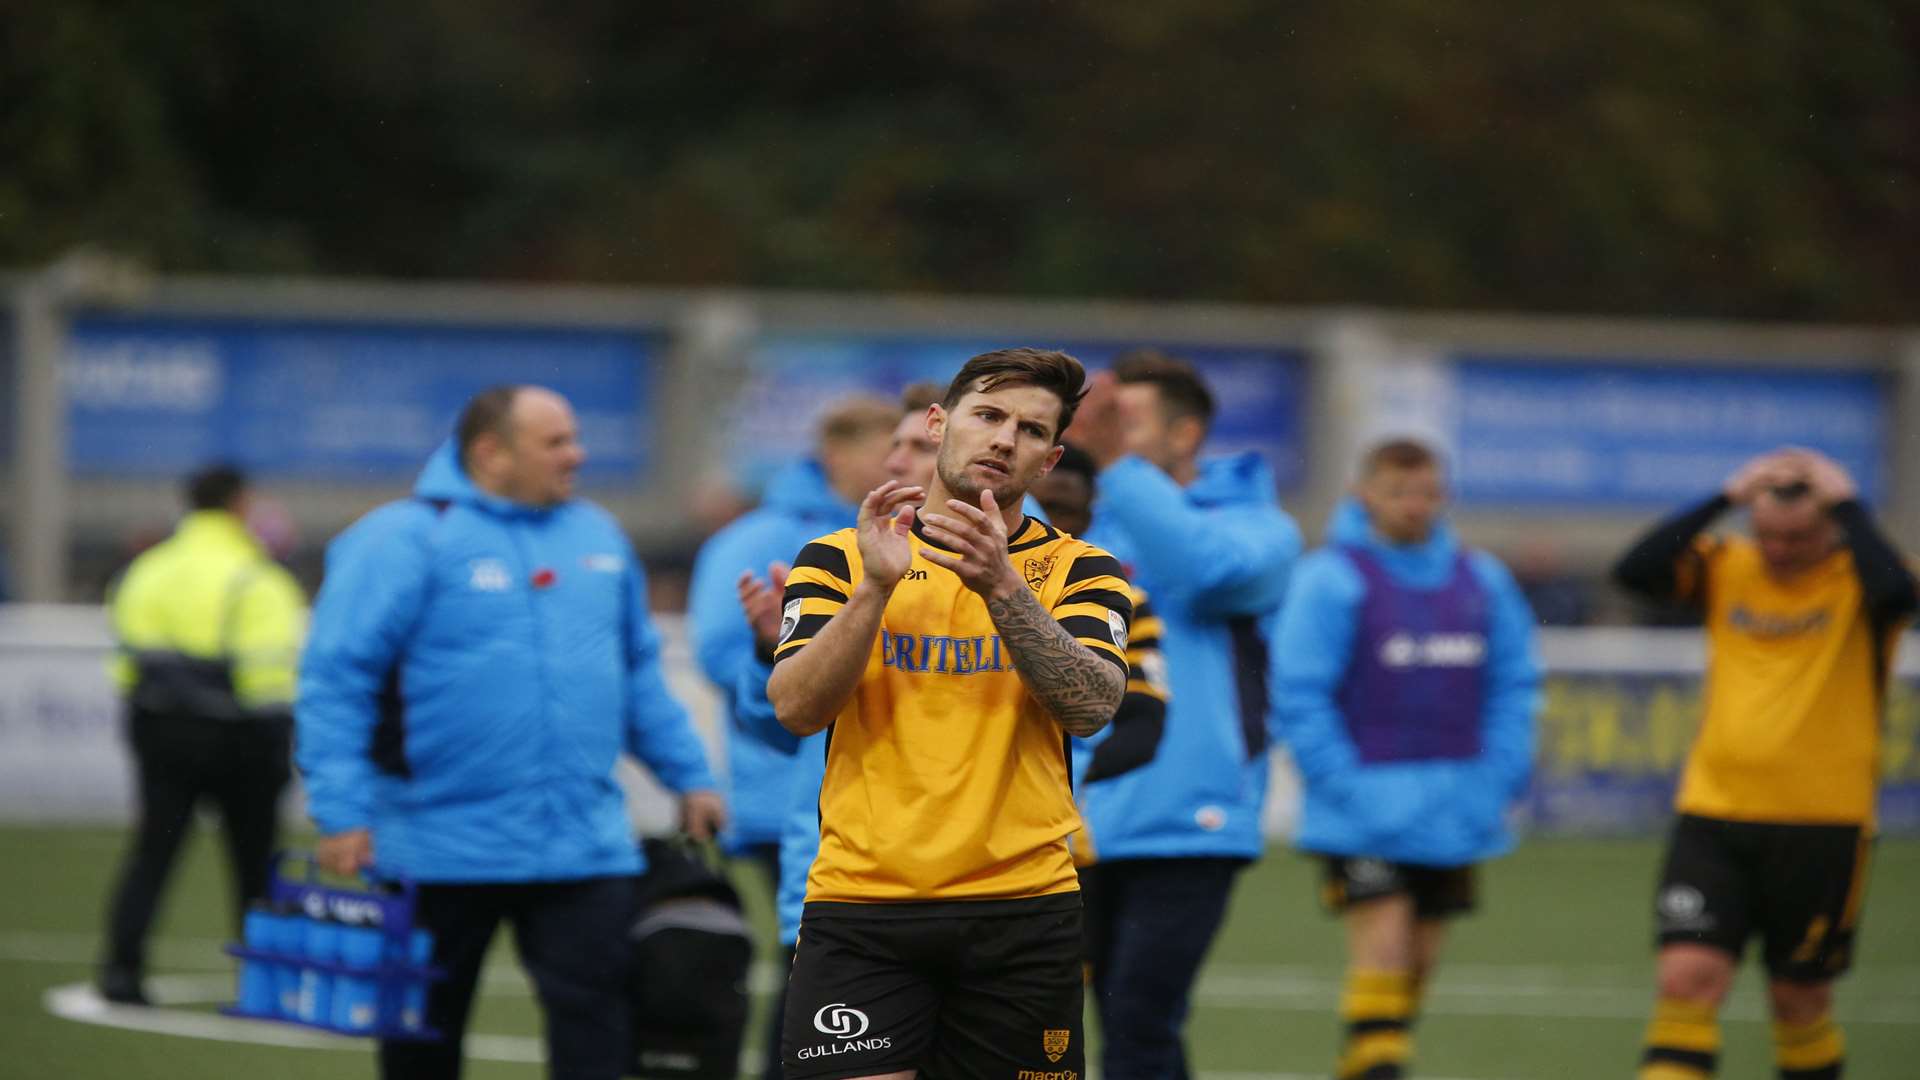 James Rogers sums up the mood at full-time Picture: Andy Jones